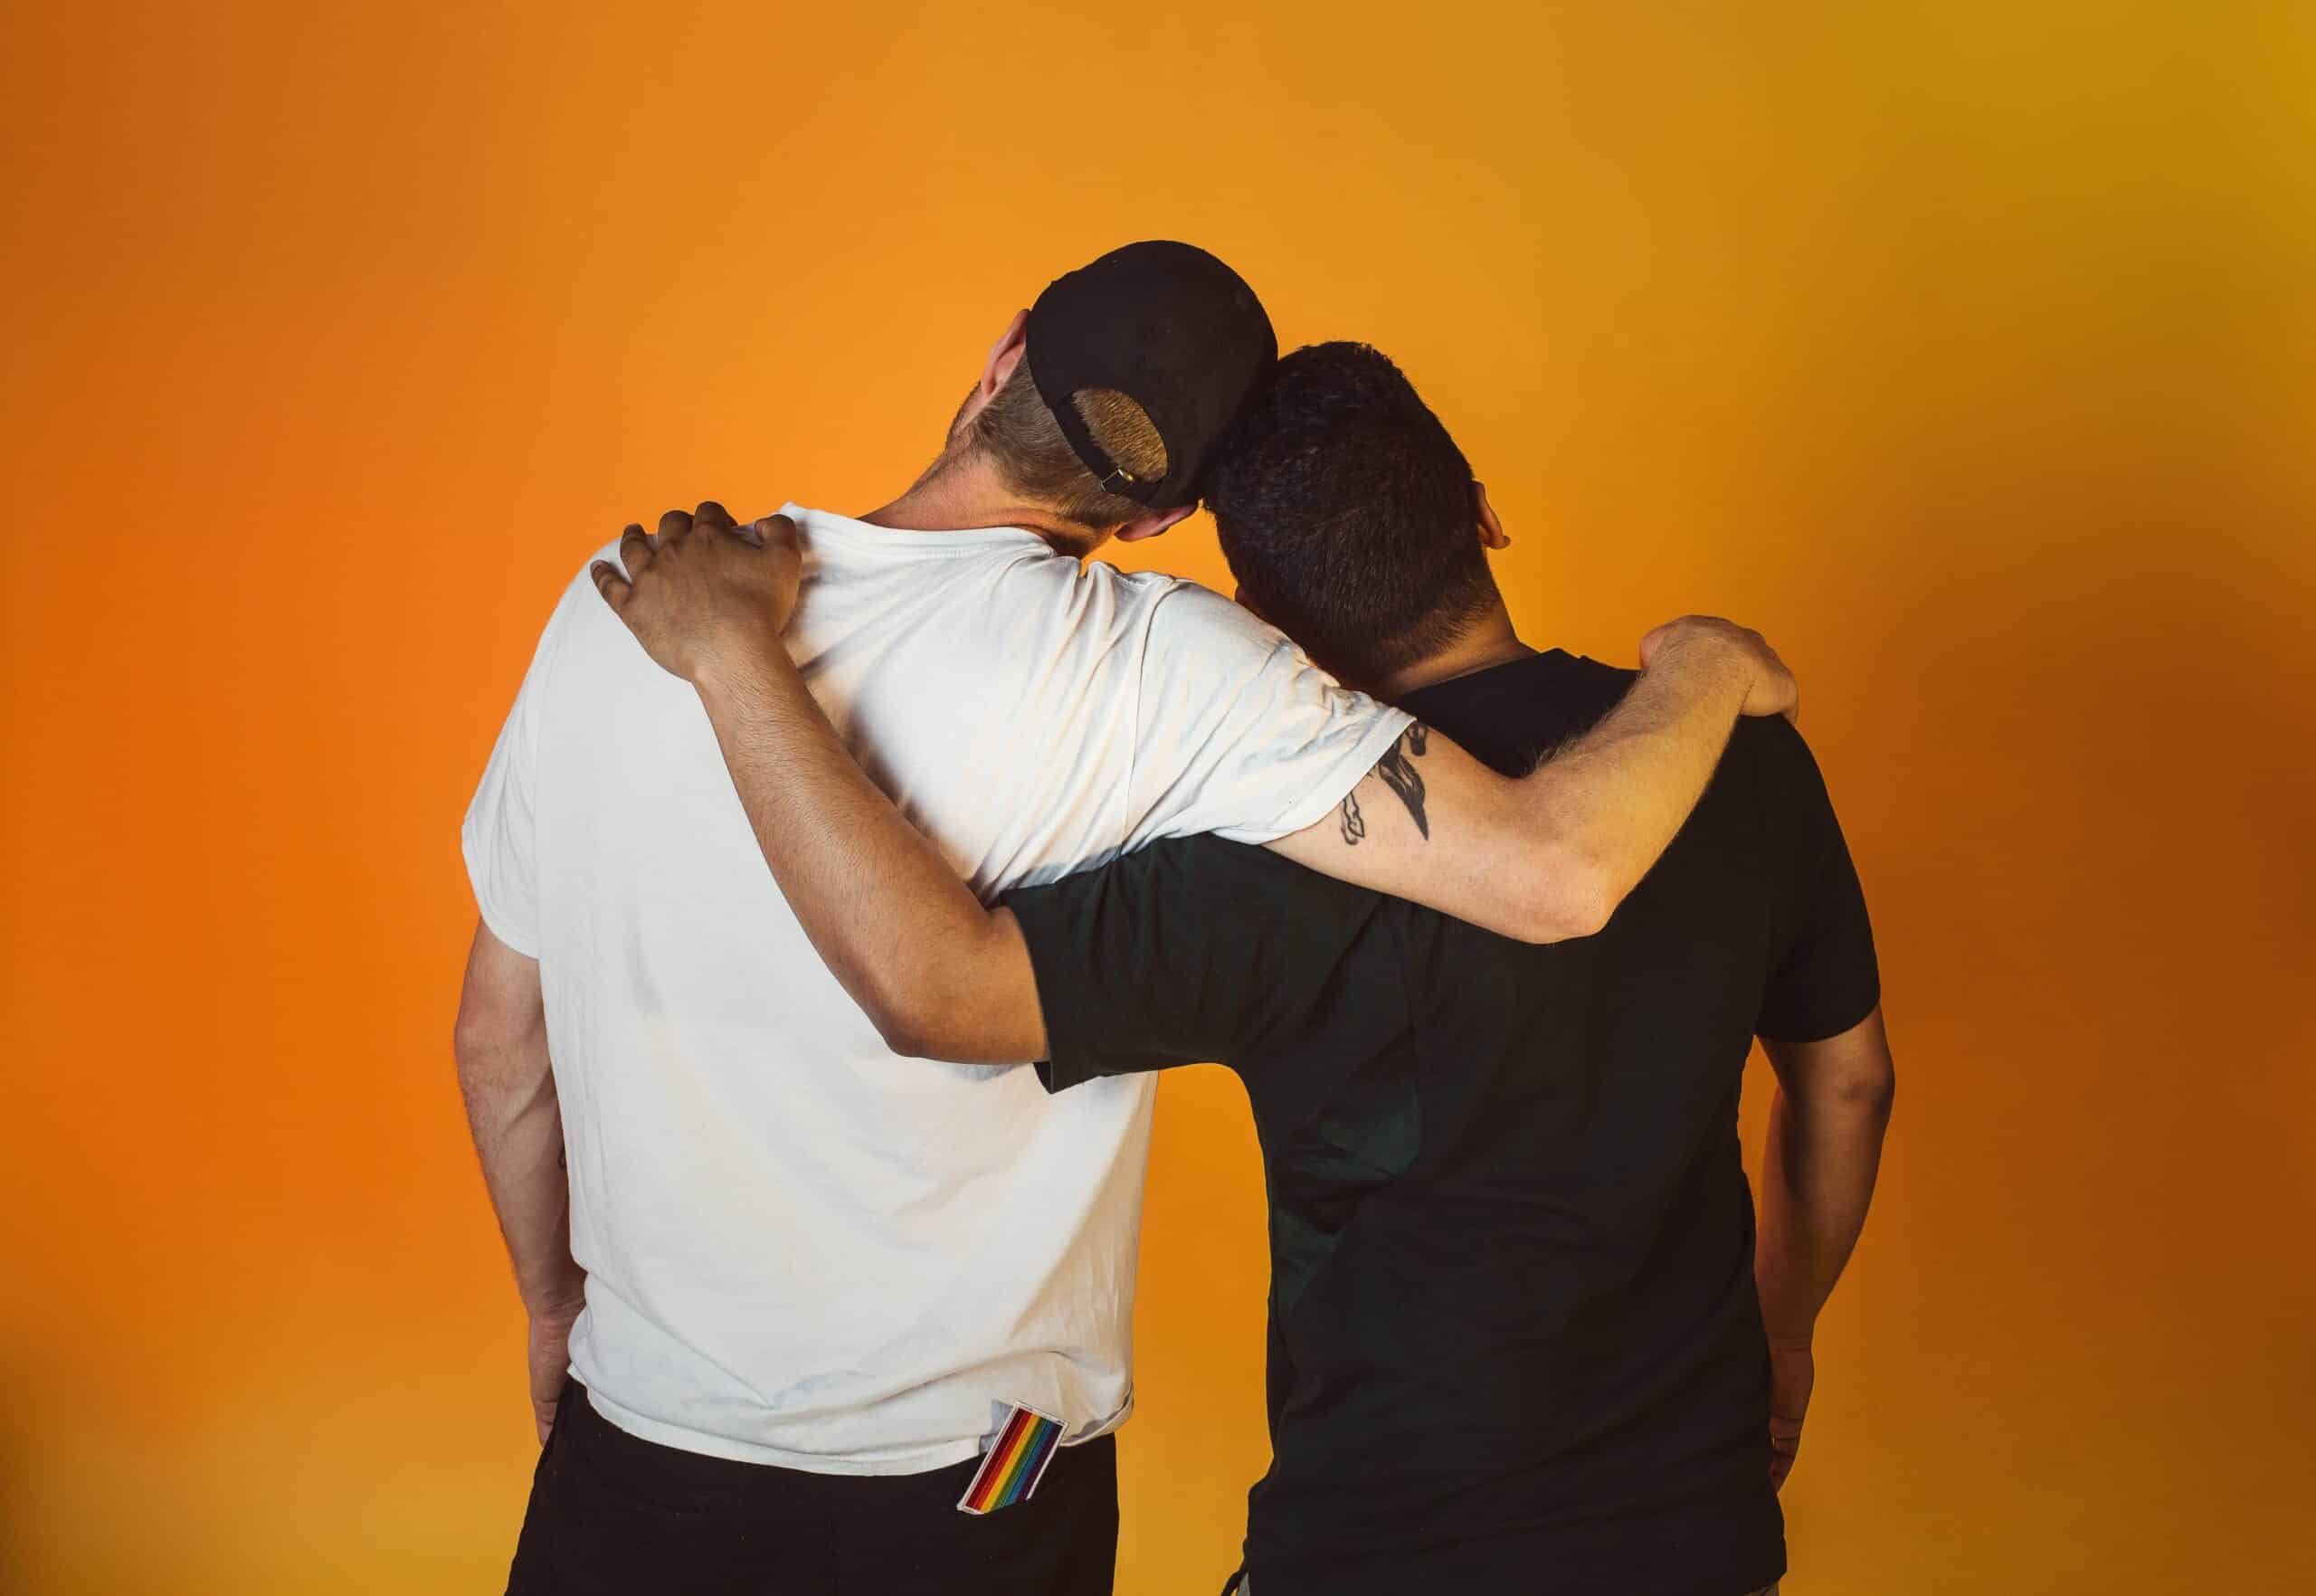 two men embrace each other against orange background